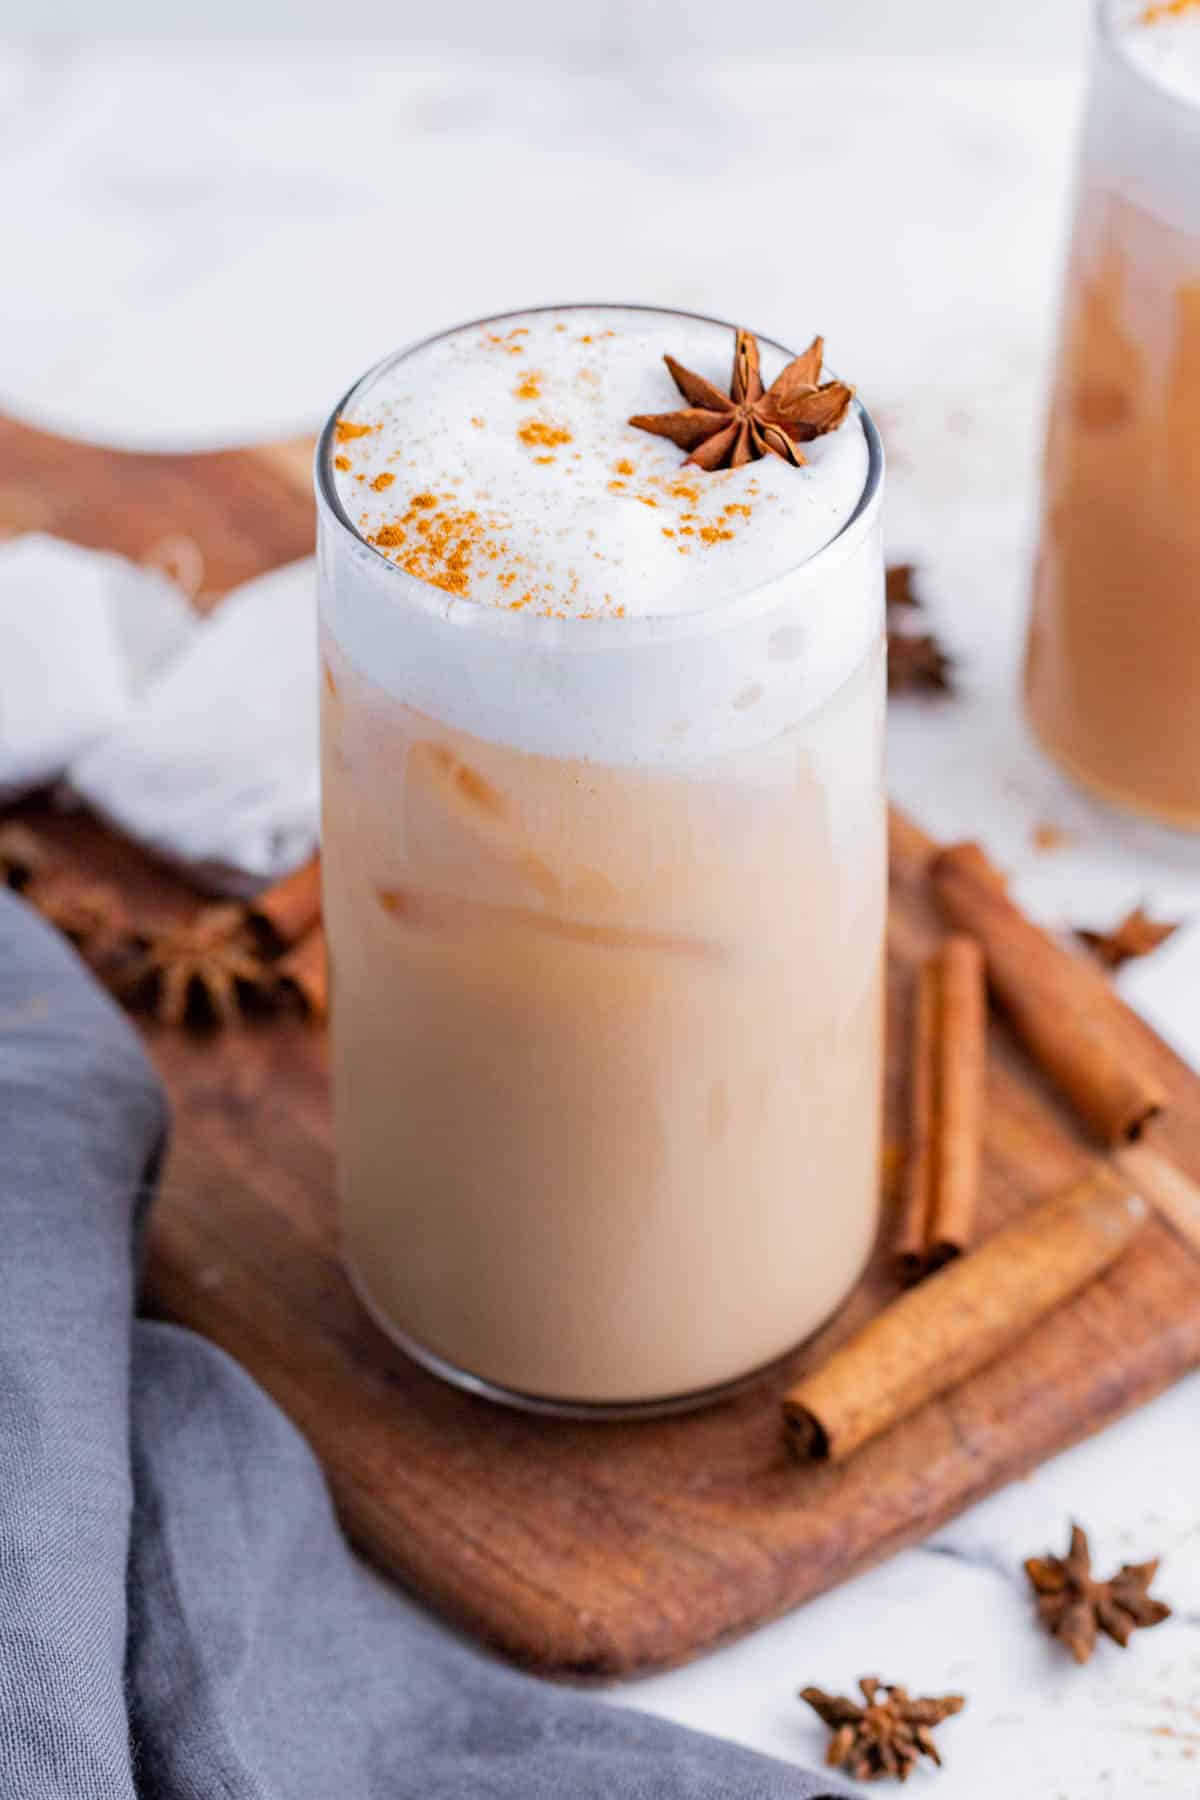 Warm Spiced Chai Recipe: How to Make It